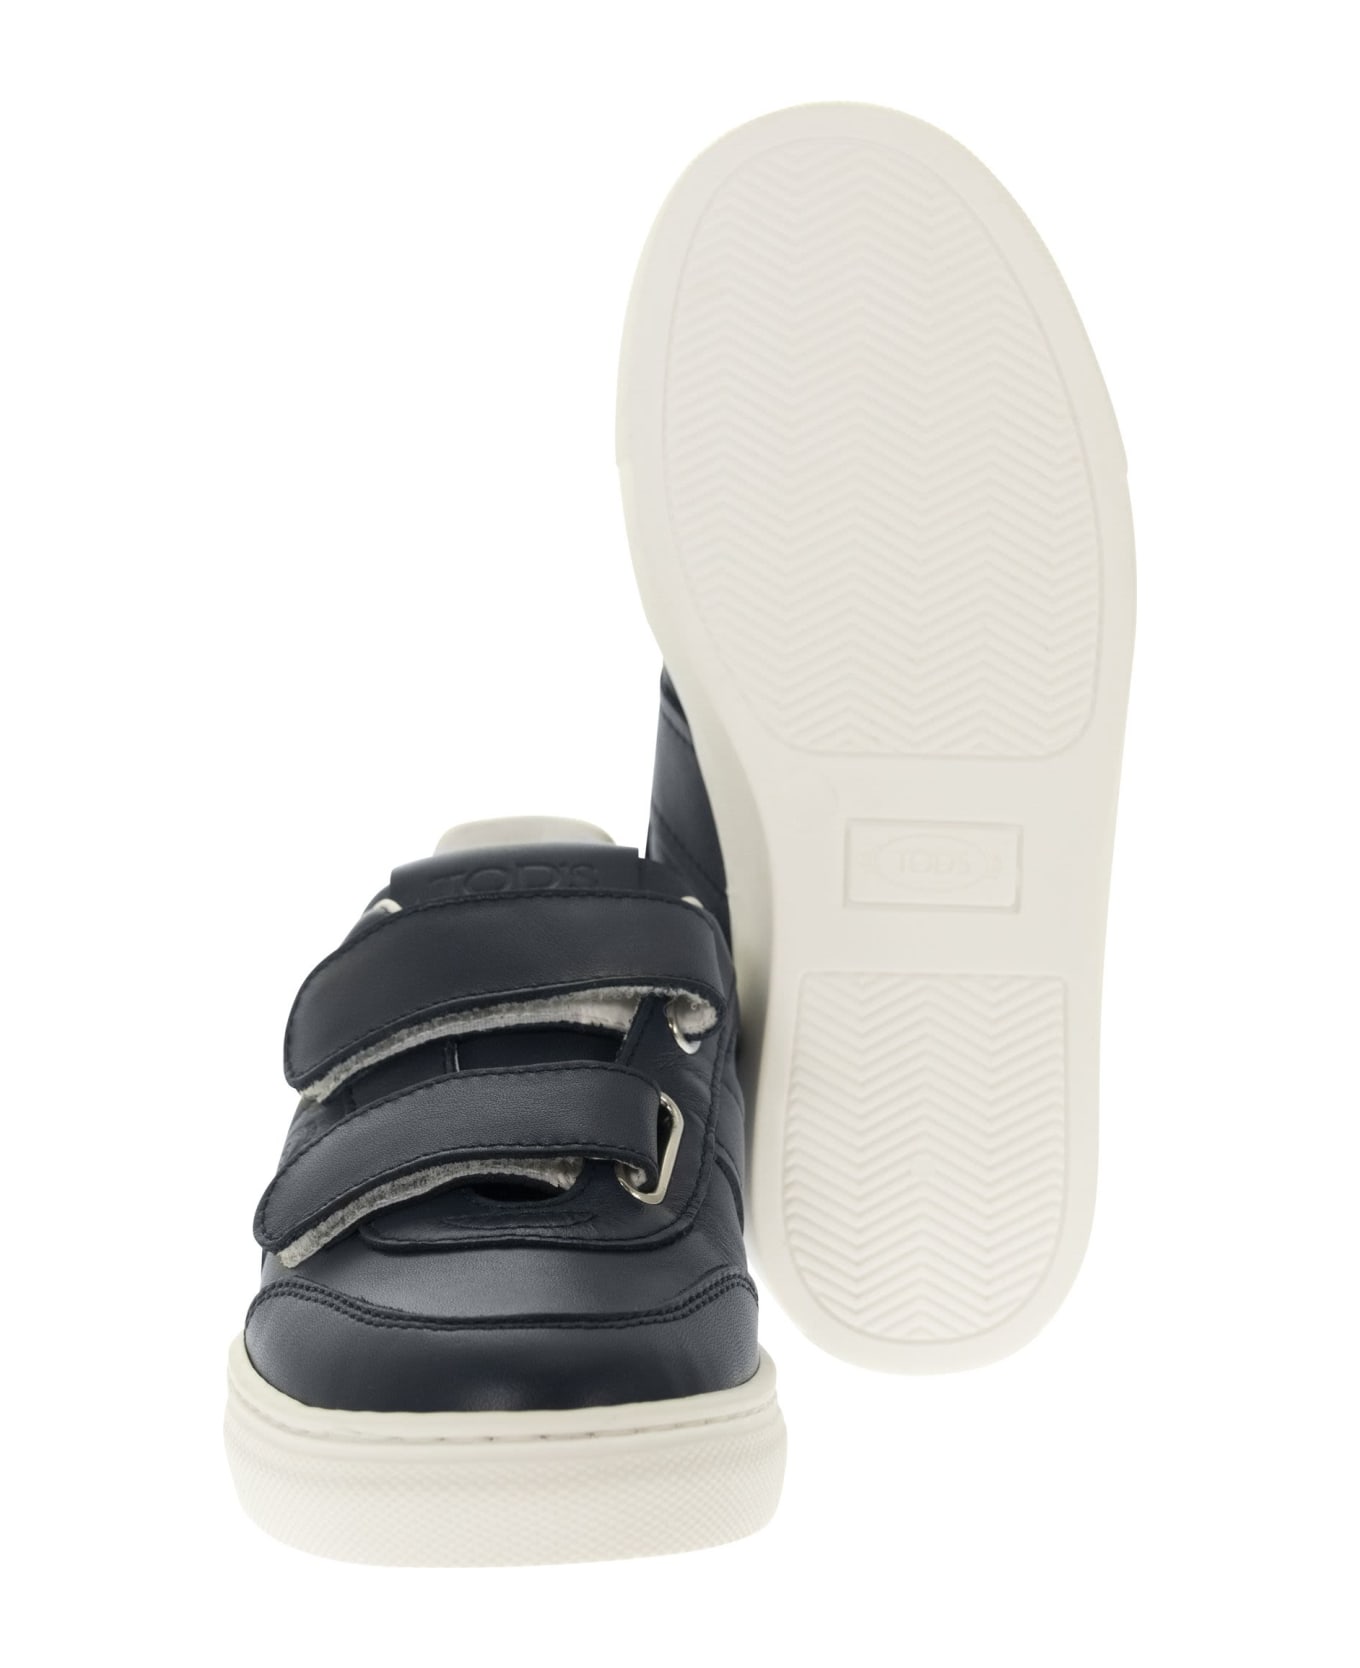 Tod's Trainers With Strap Closure - Dark Blue